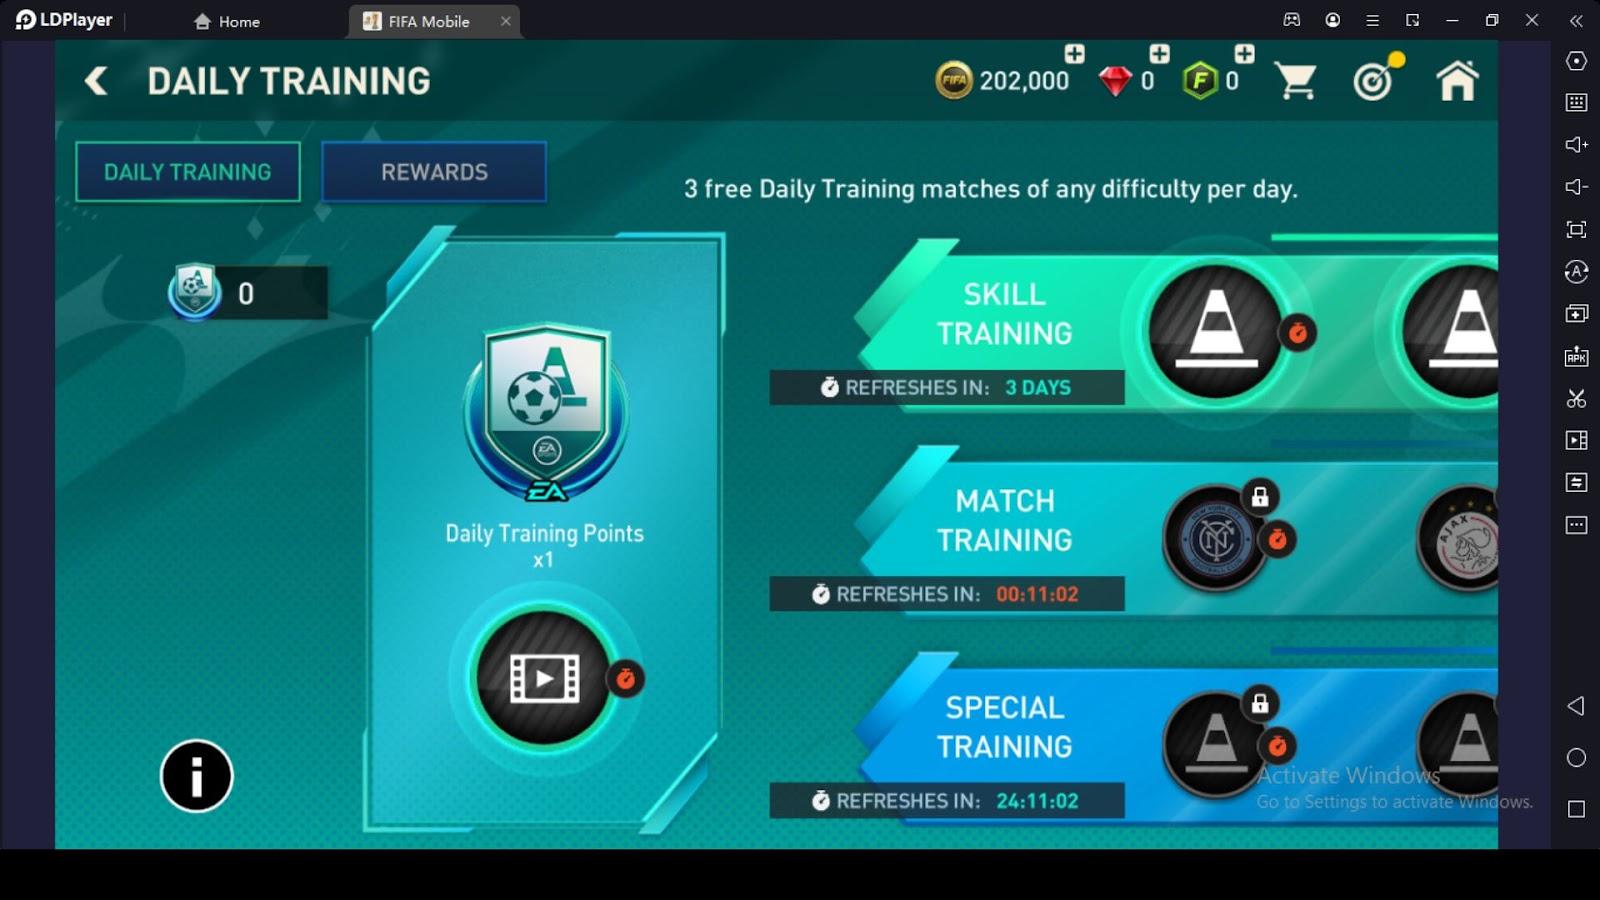 Daily Training in EA SPORTS FIFA World Cup 2022™